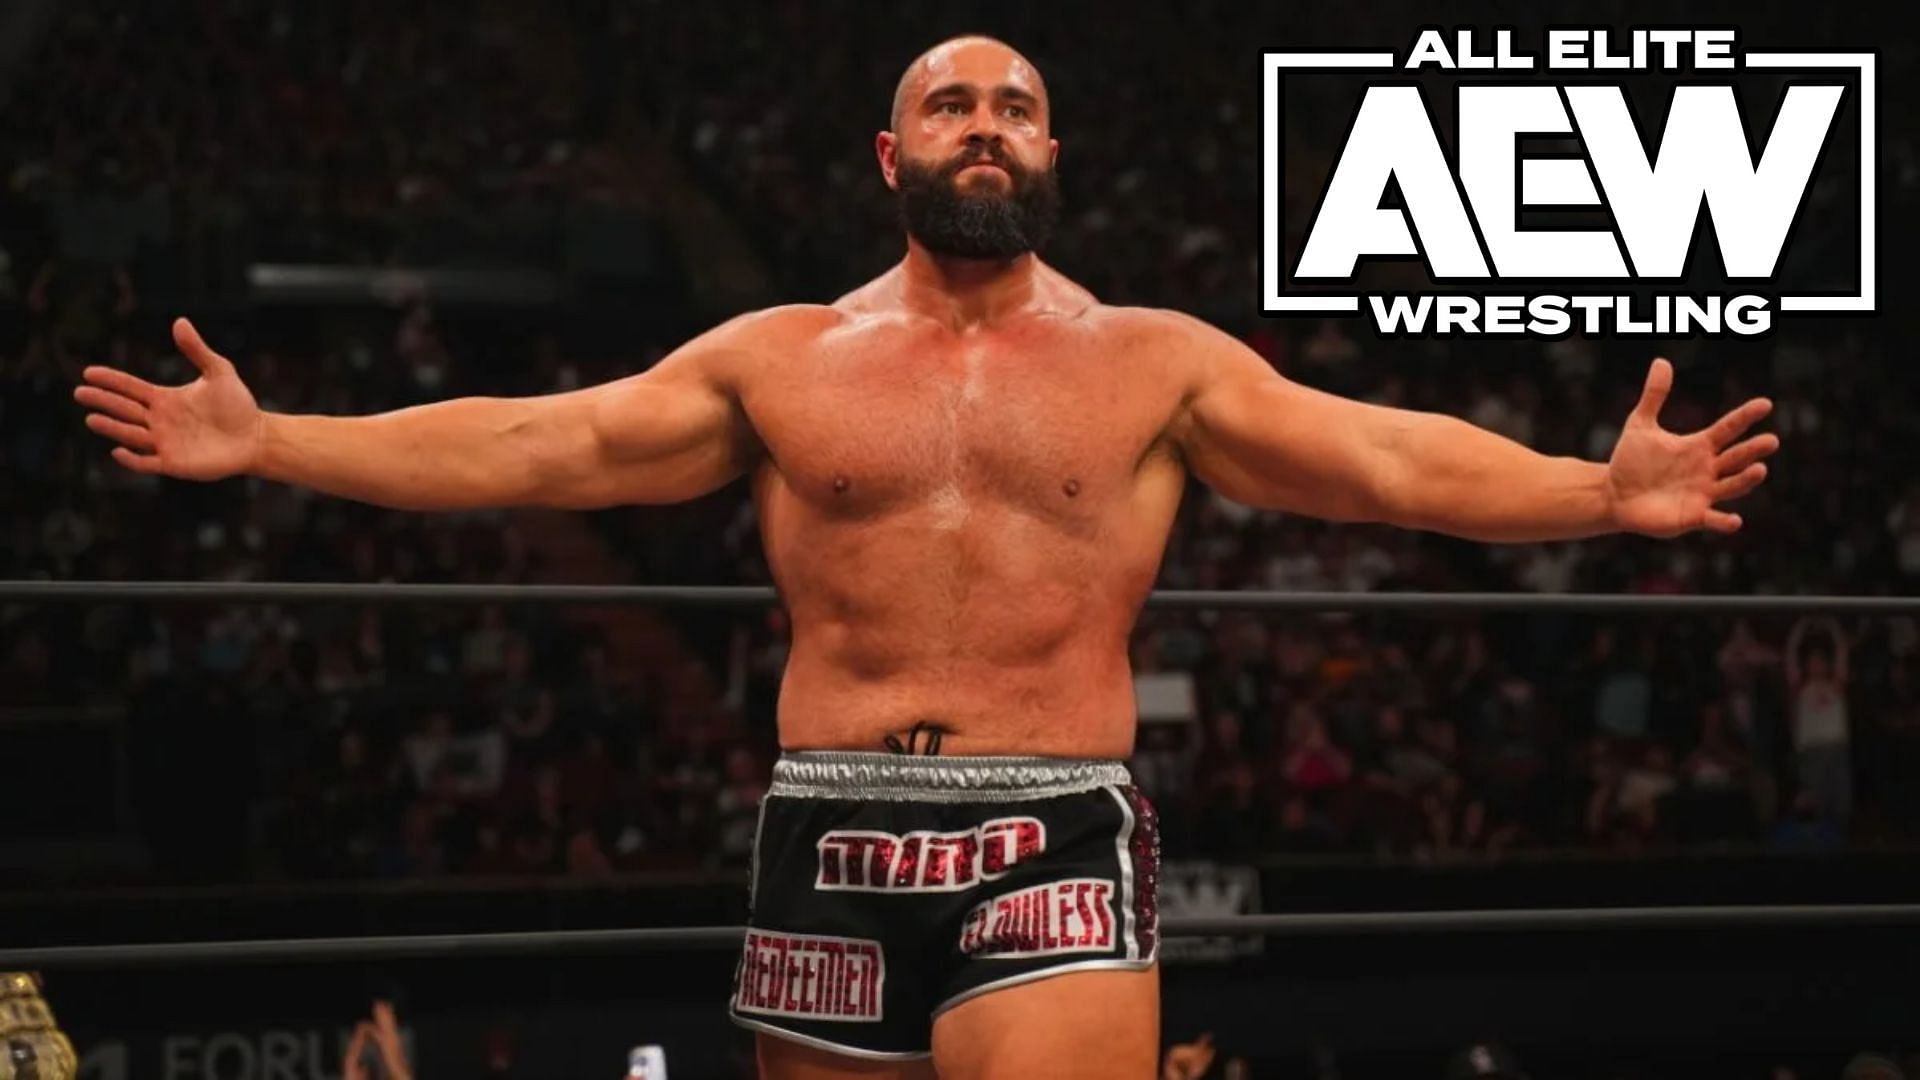 Could The Redeemer be on his way back to AEW?